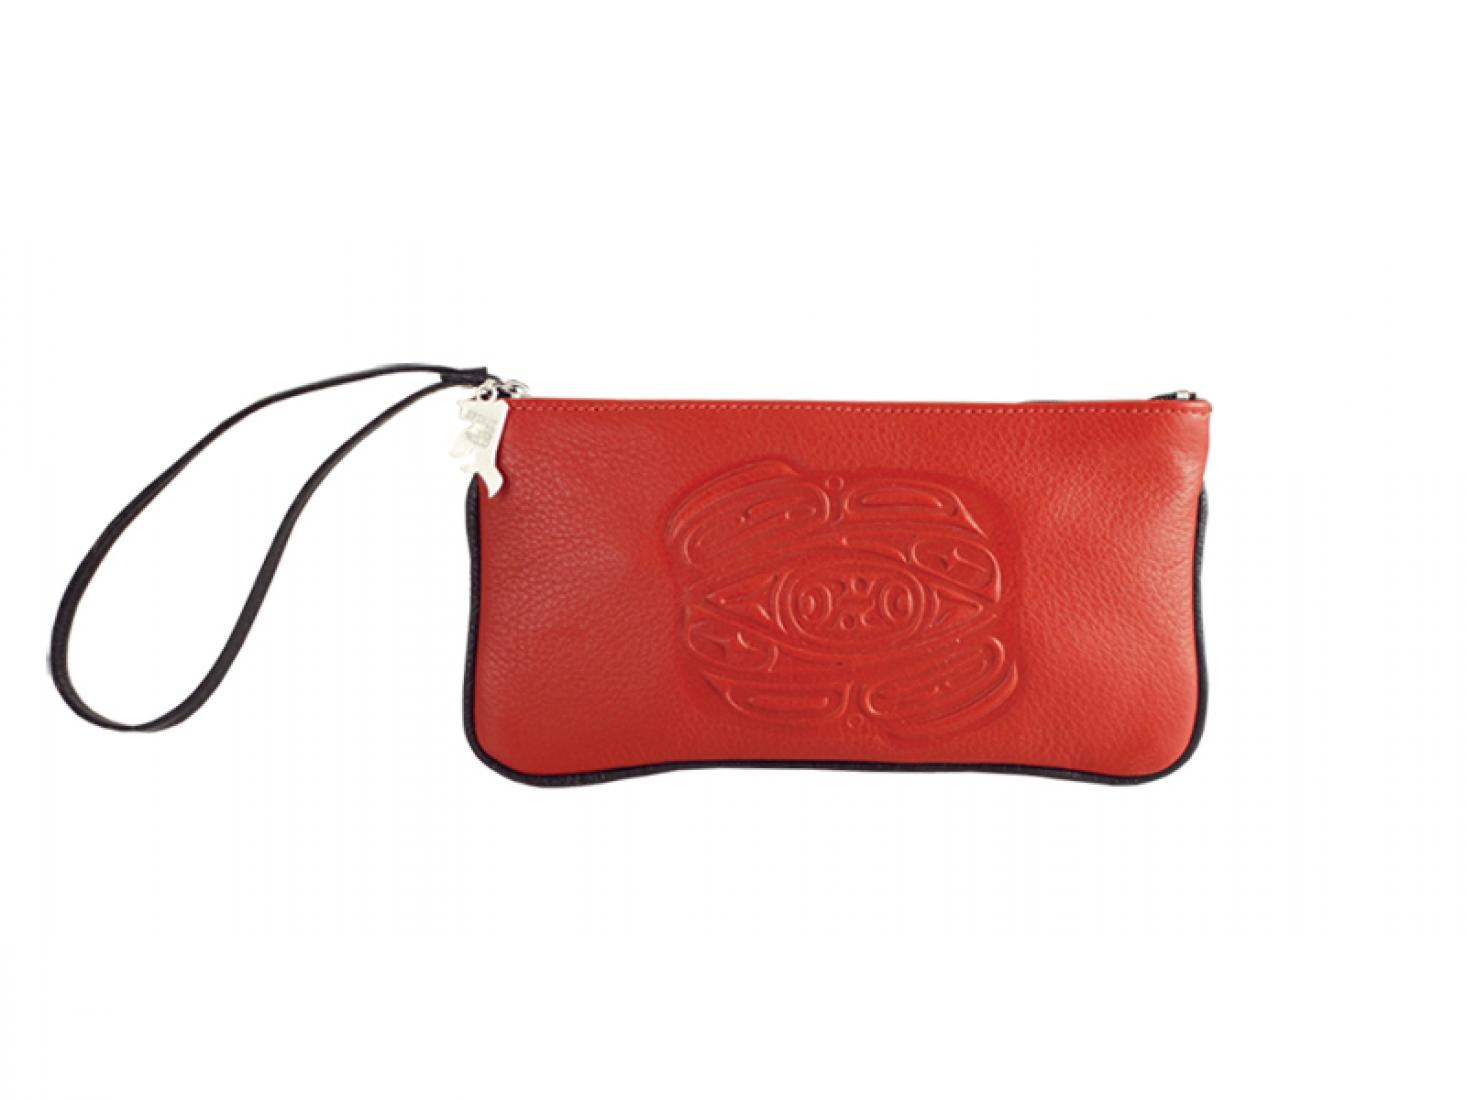 Embossed Leather Clutch Bag with Raven Design by Corrine Hunt, Red Deer Skin